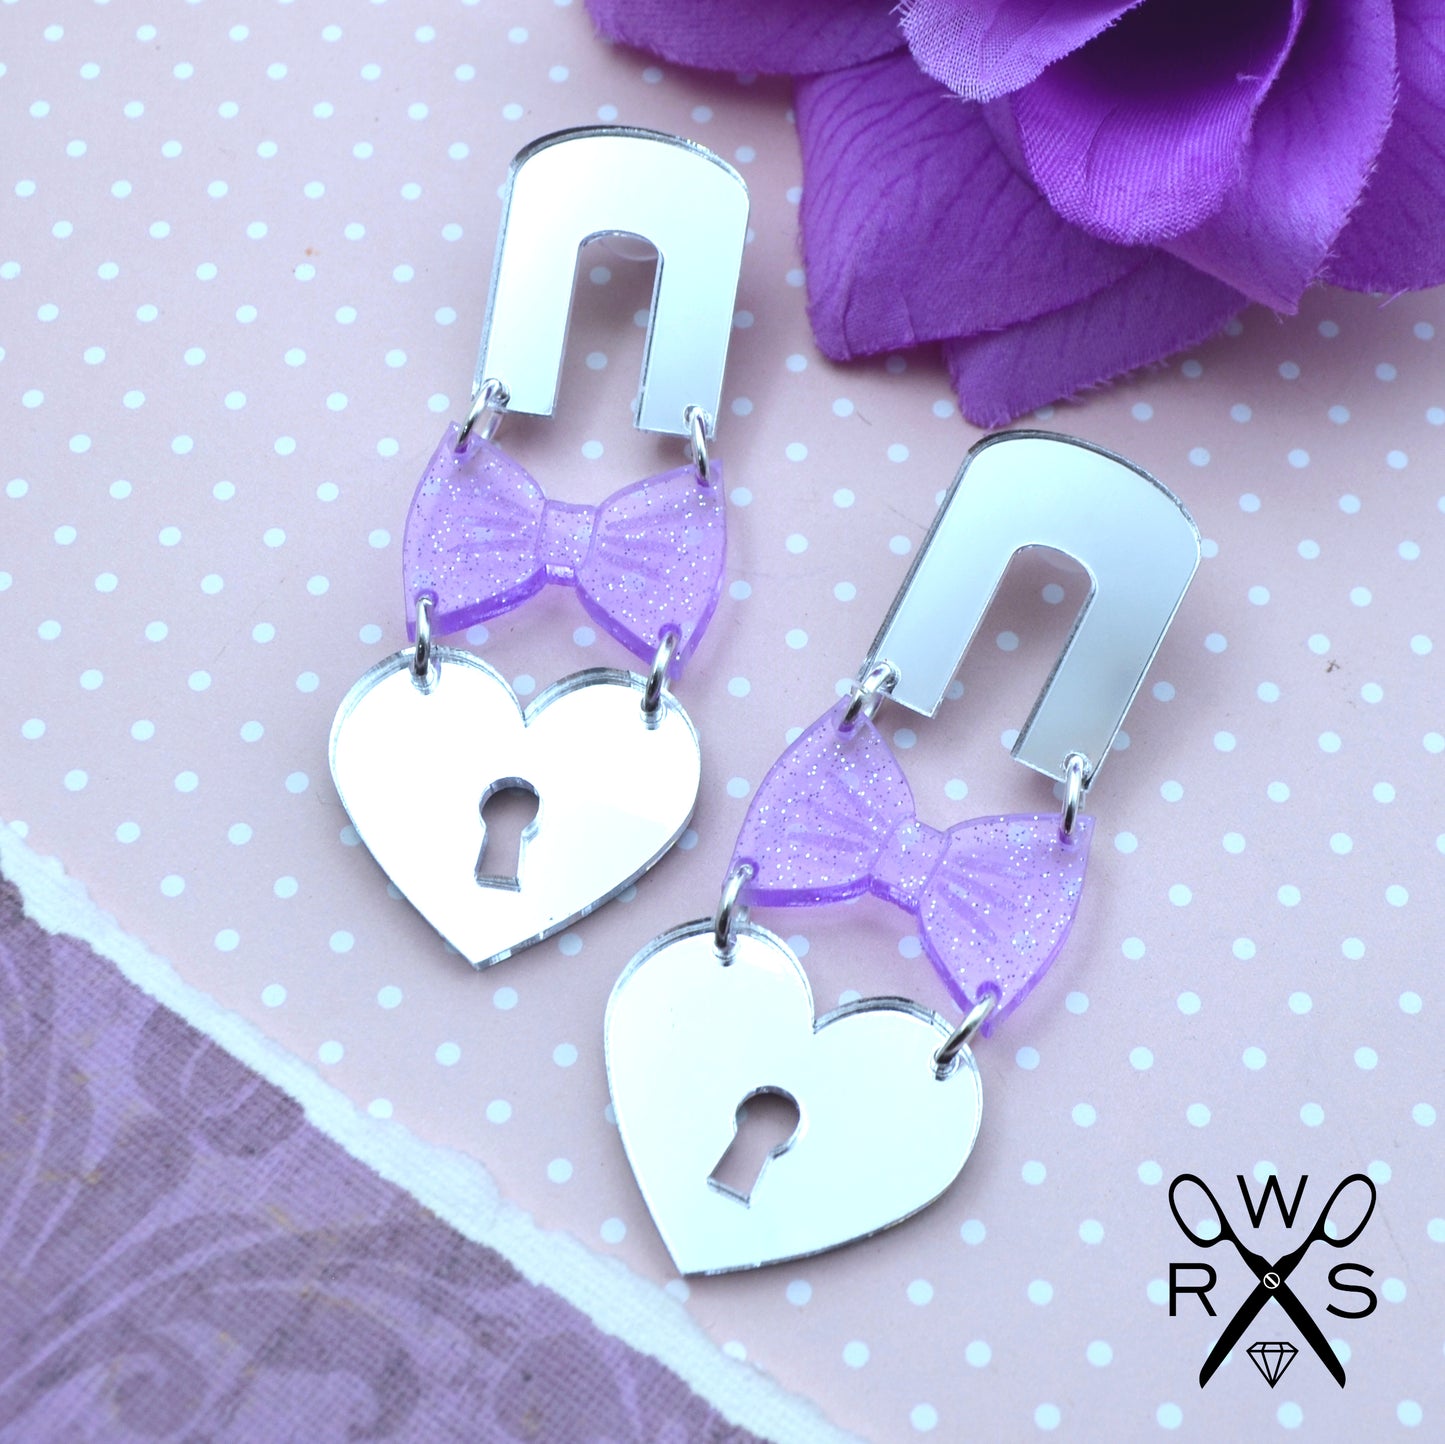 SALE DEVOTED DARLING DANGLES in Silver Mirror and Lavender Glitter Laser Cut Acrylic